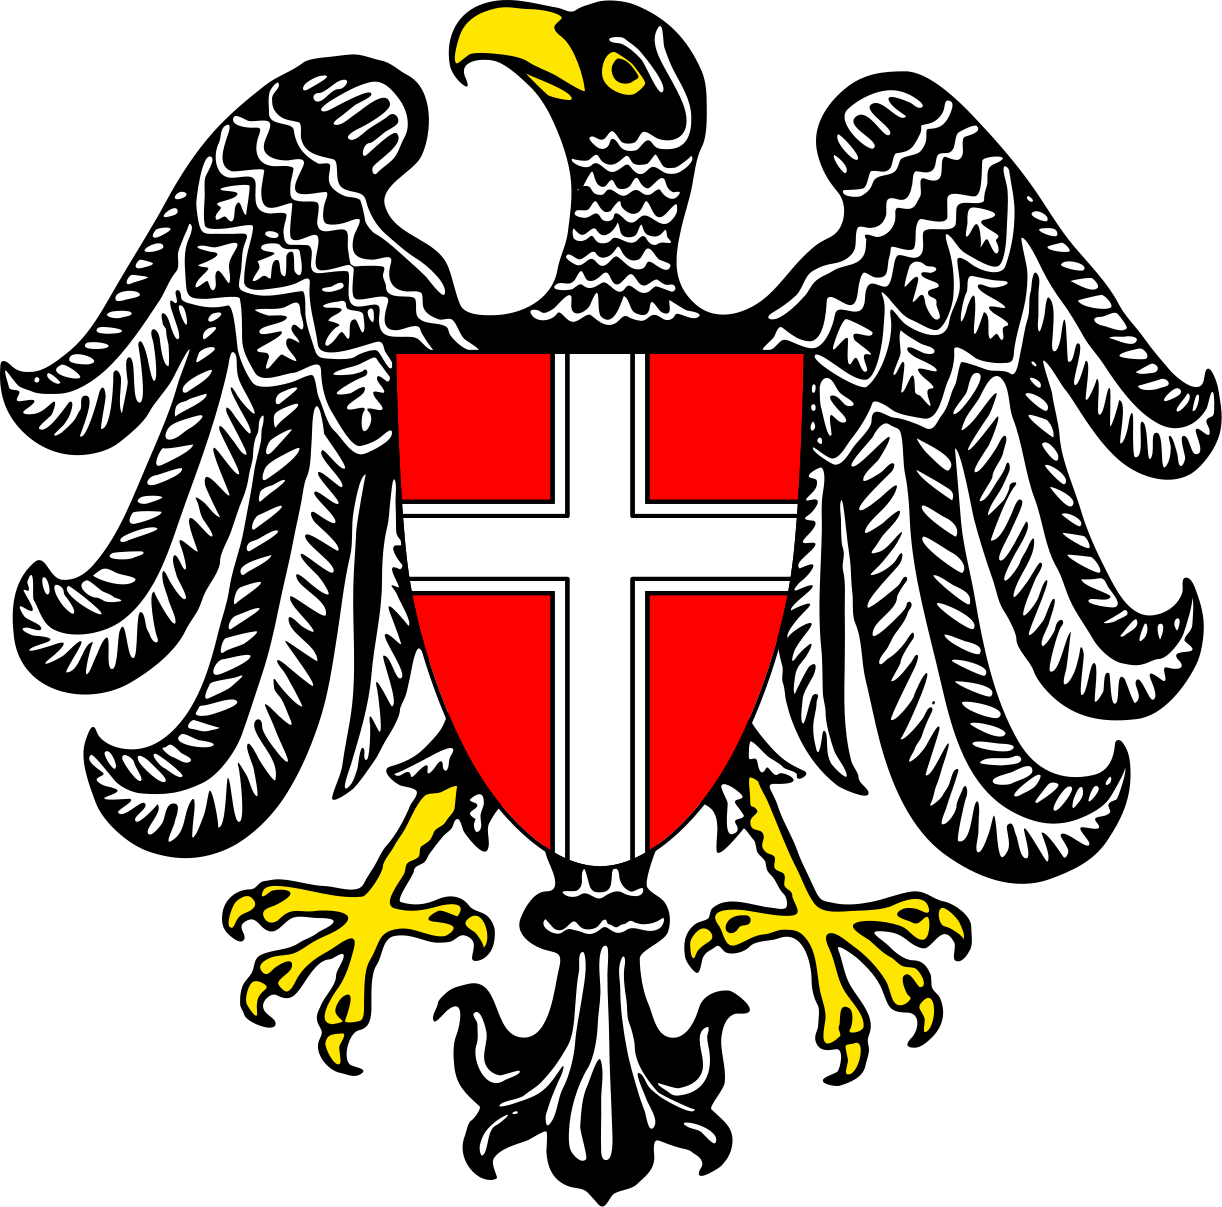 Coat of Arms of Vienna